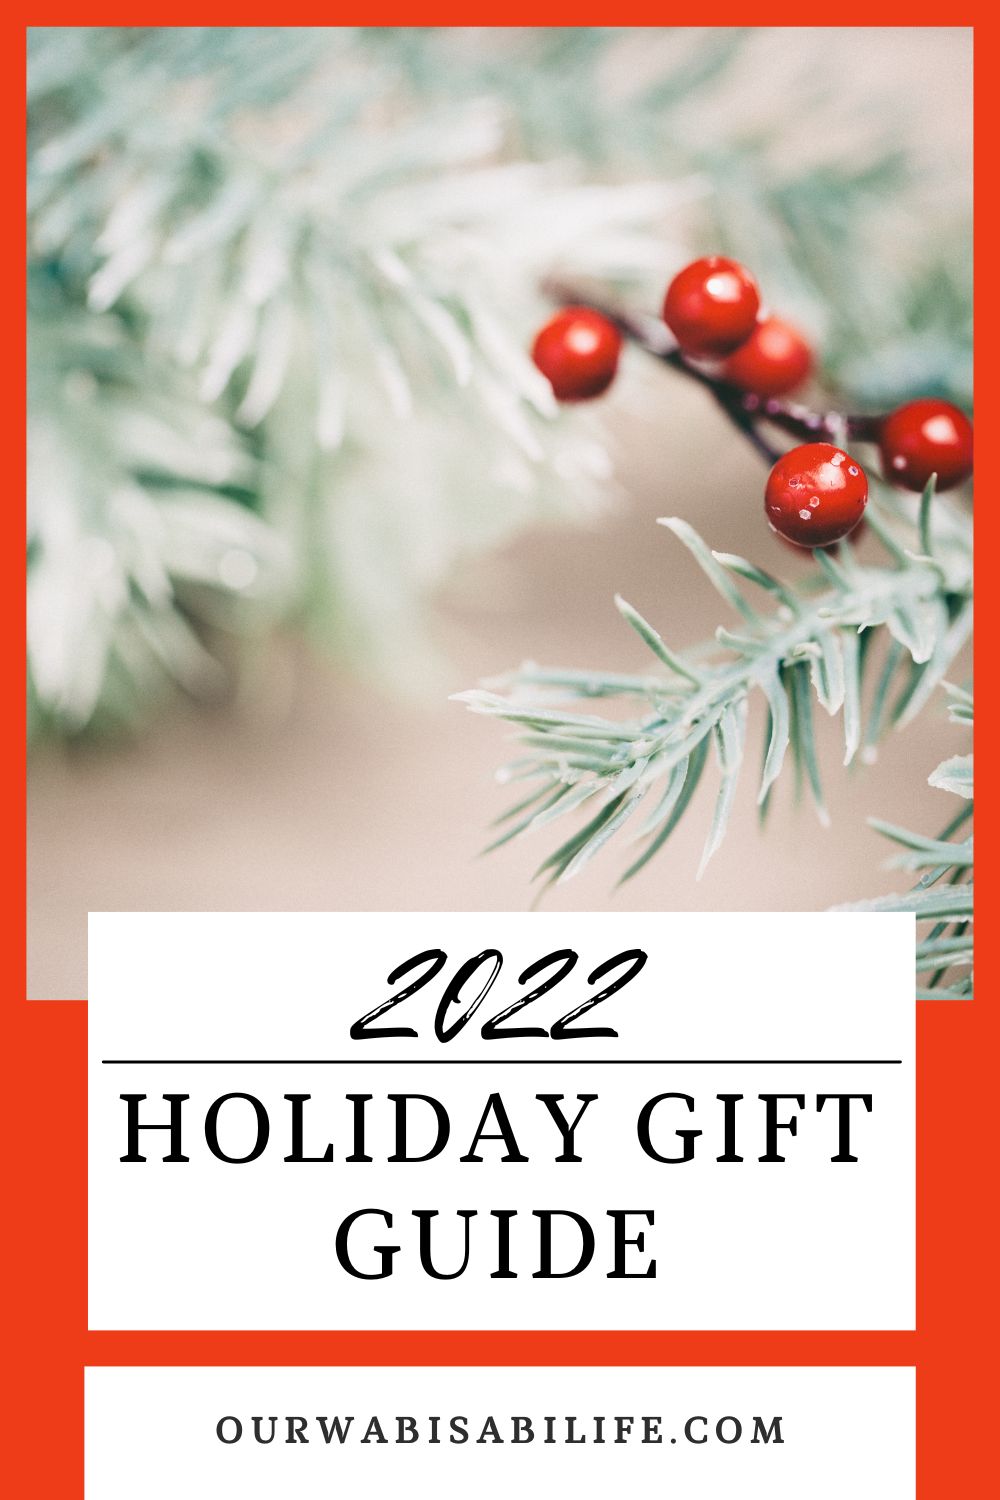 2022 Holiday gift guide with evergreen and holly berries